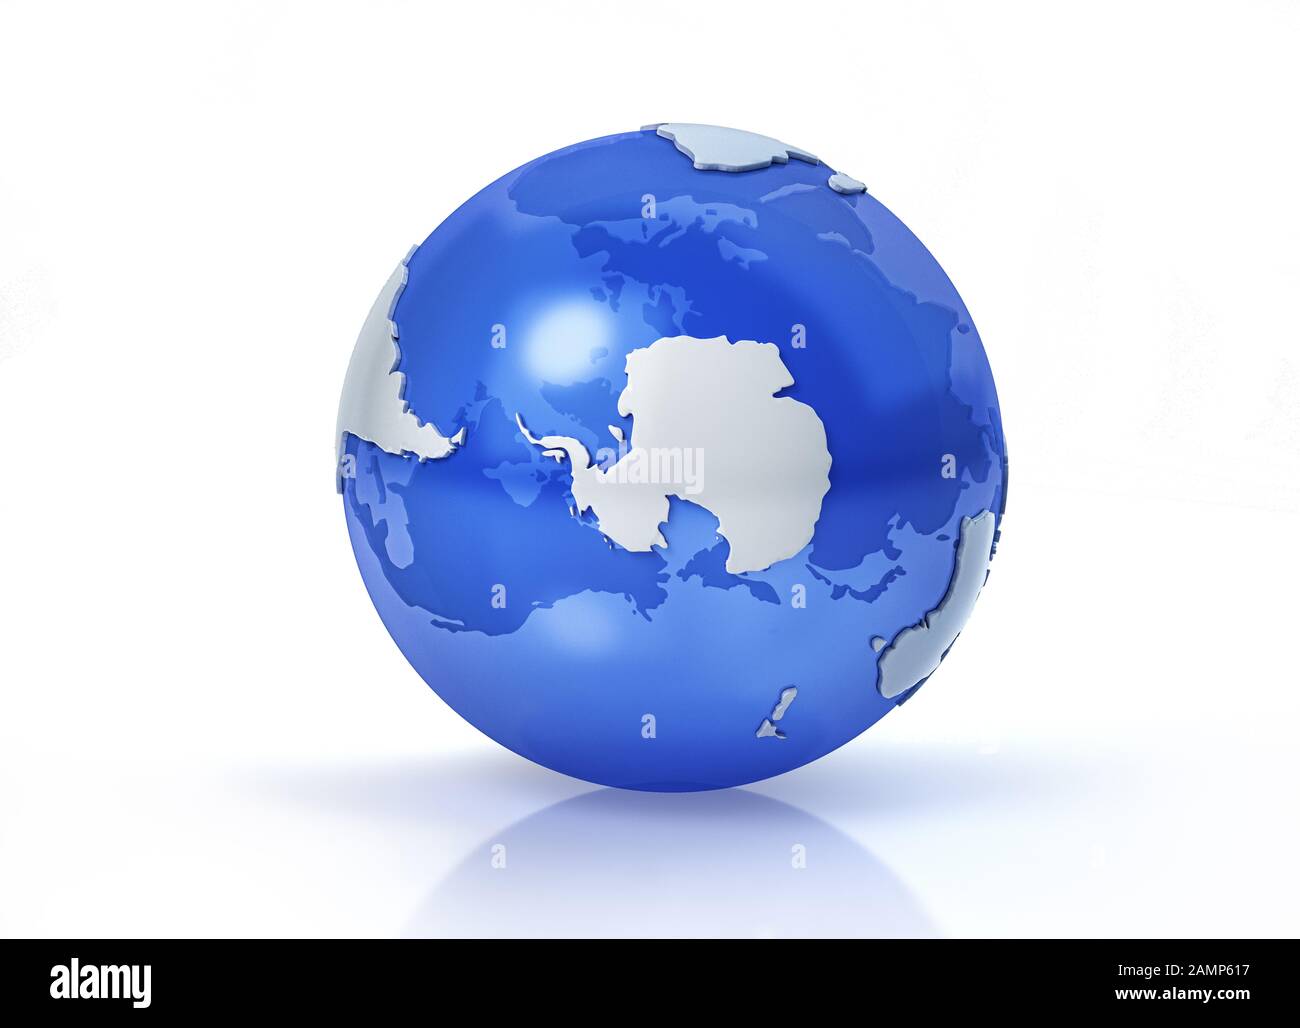 Earth globe stylized. Grey continents in relief. With transparent seas to reveal continents on the other side. On white background. South Pole view. Stock Photo